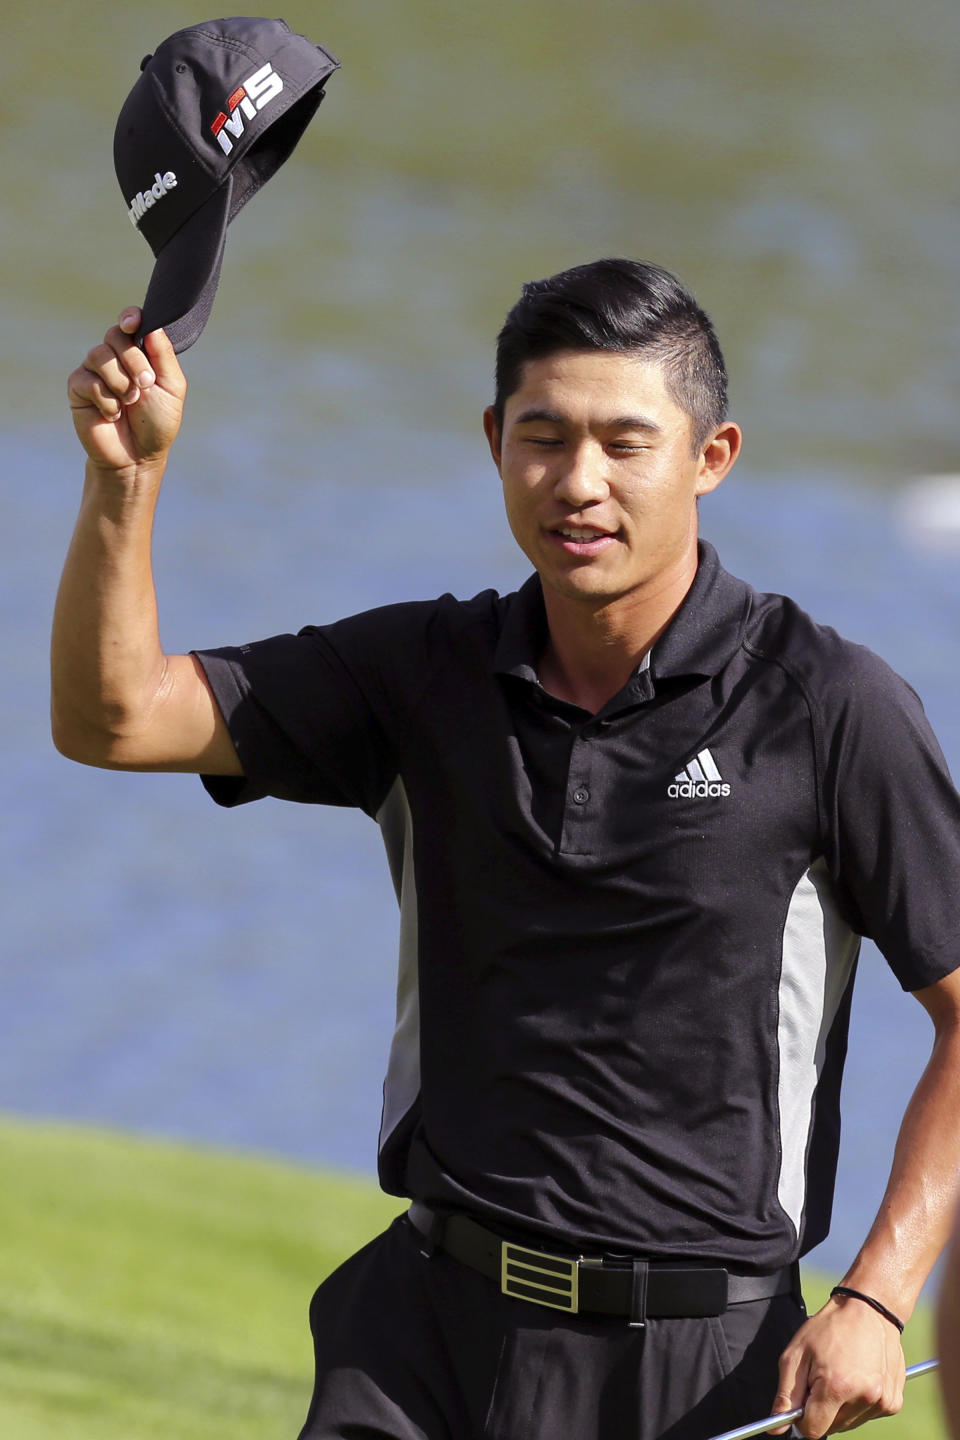 Collin Morikawa tips his cap to the gallery after sinking a birdie putt on the 18th Green during the final round in the Barracuda Championship golf tournament at Montreux Golf & Country Club in Reno, Nev., Sunday, July 28, 2019. (AP Photo/Lance Iversen)